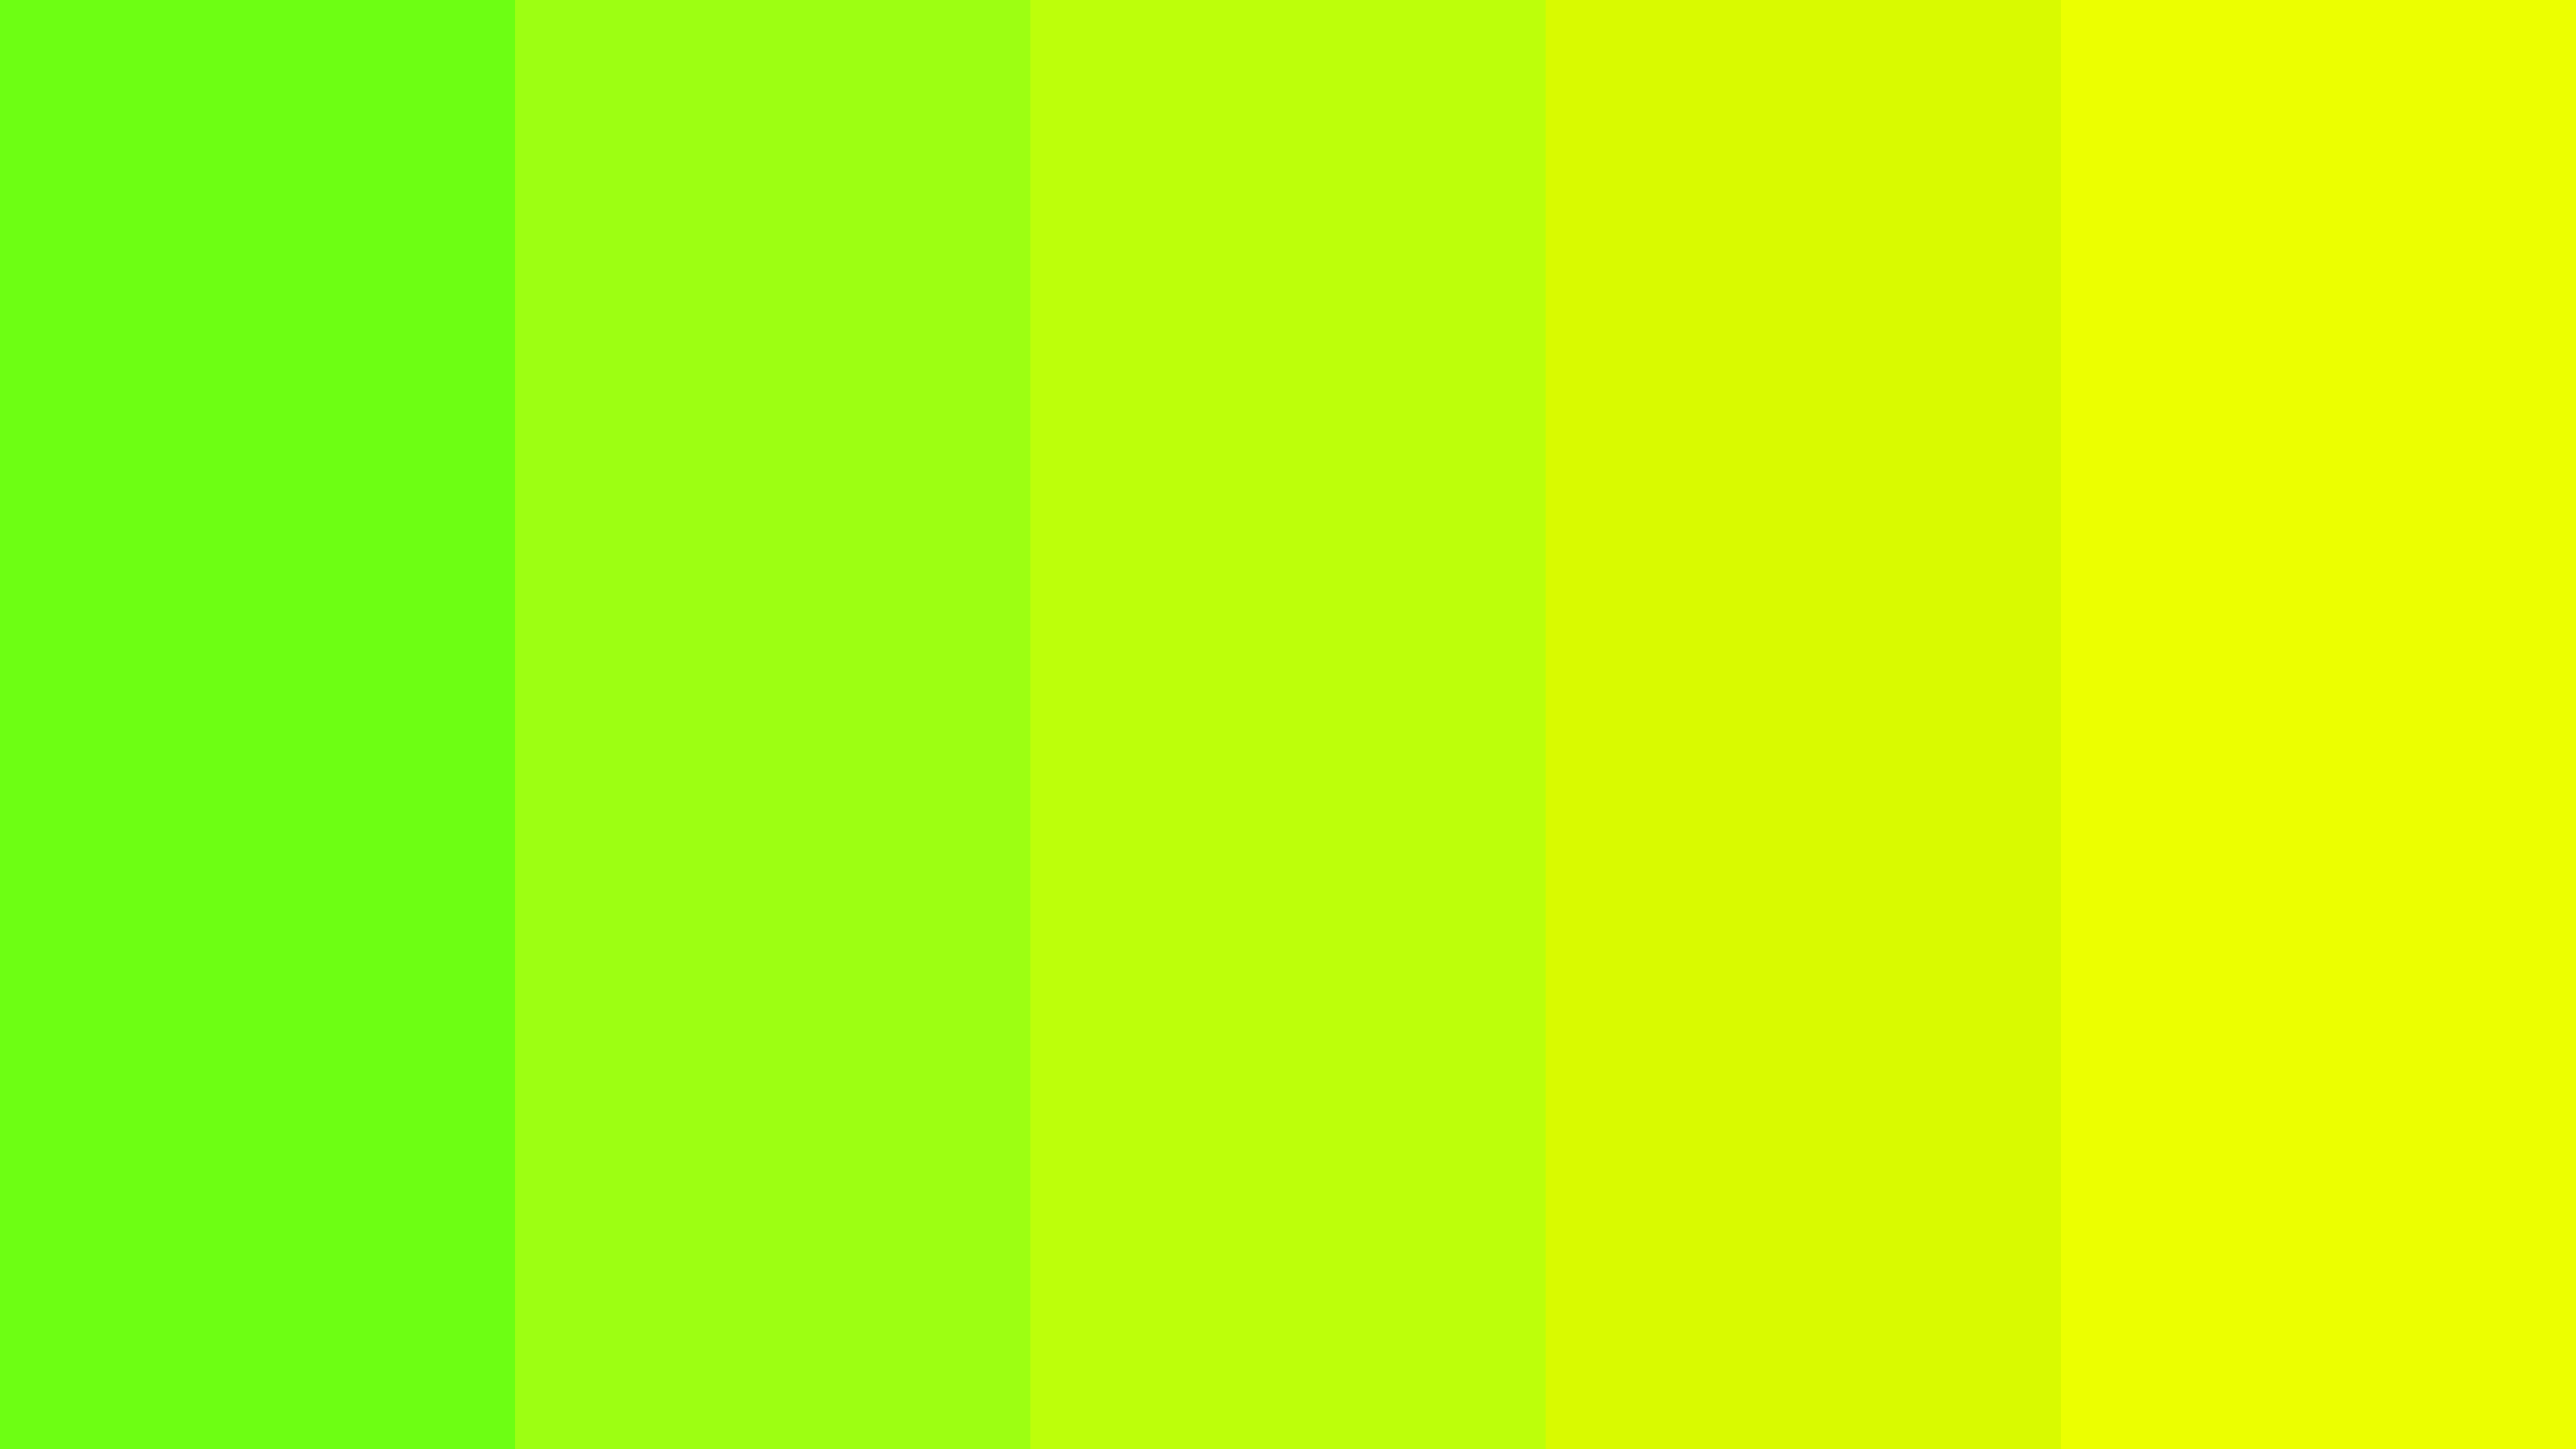 Bright Green Chartreuse Lime Chartreuse Yellow Chartreuse Yellow Color Scheme 